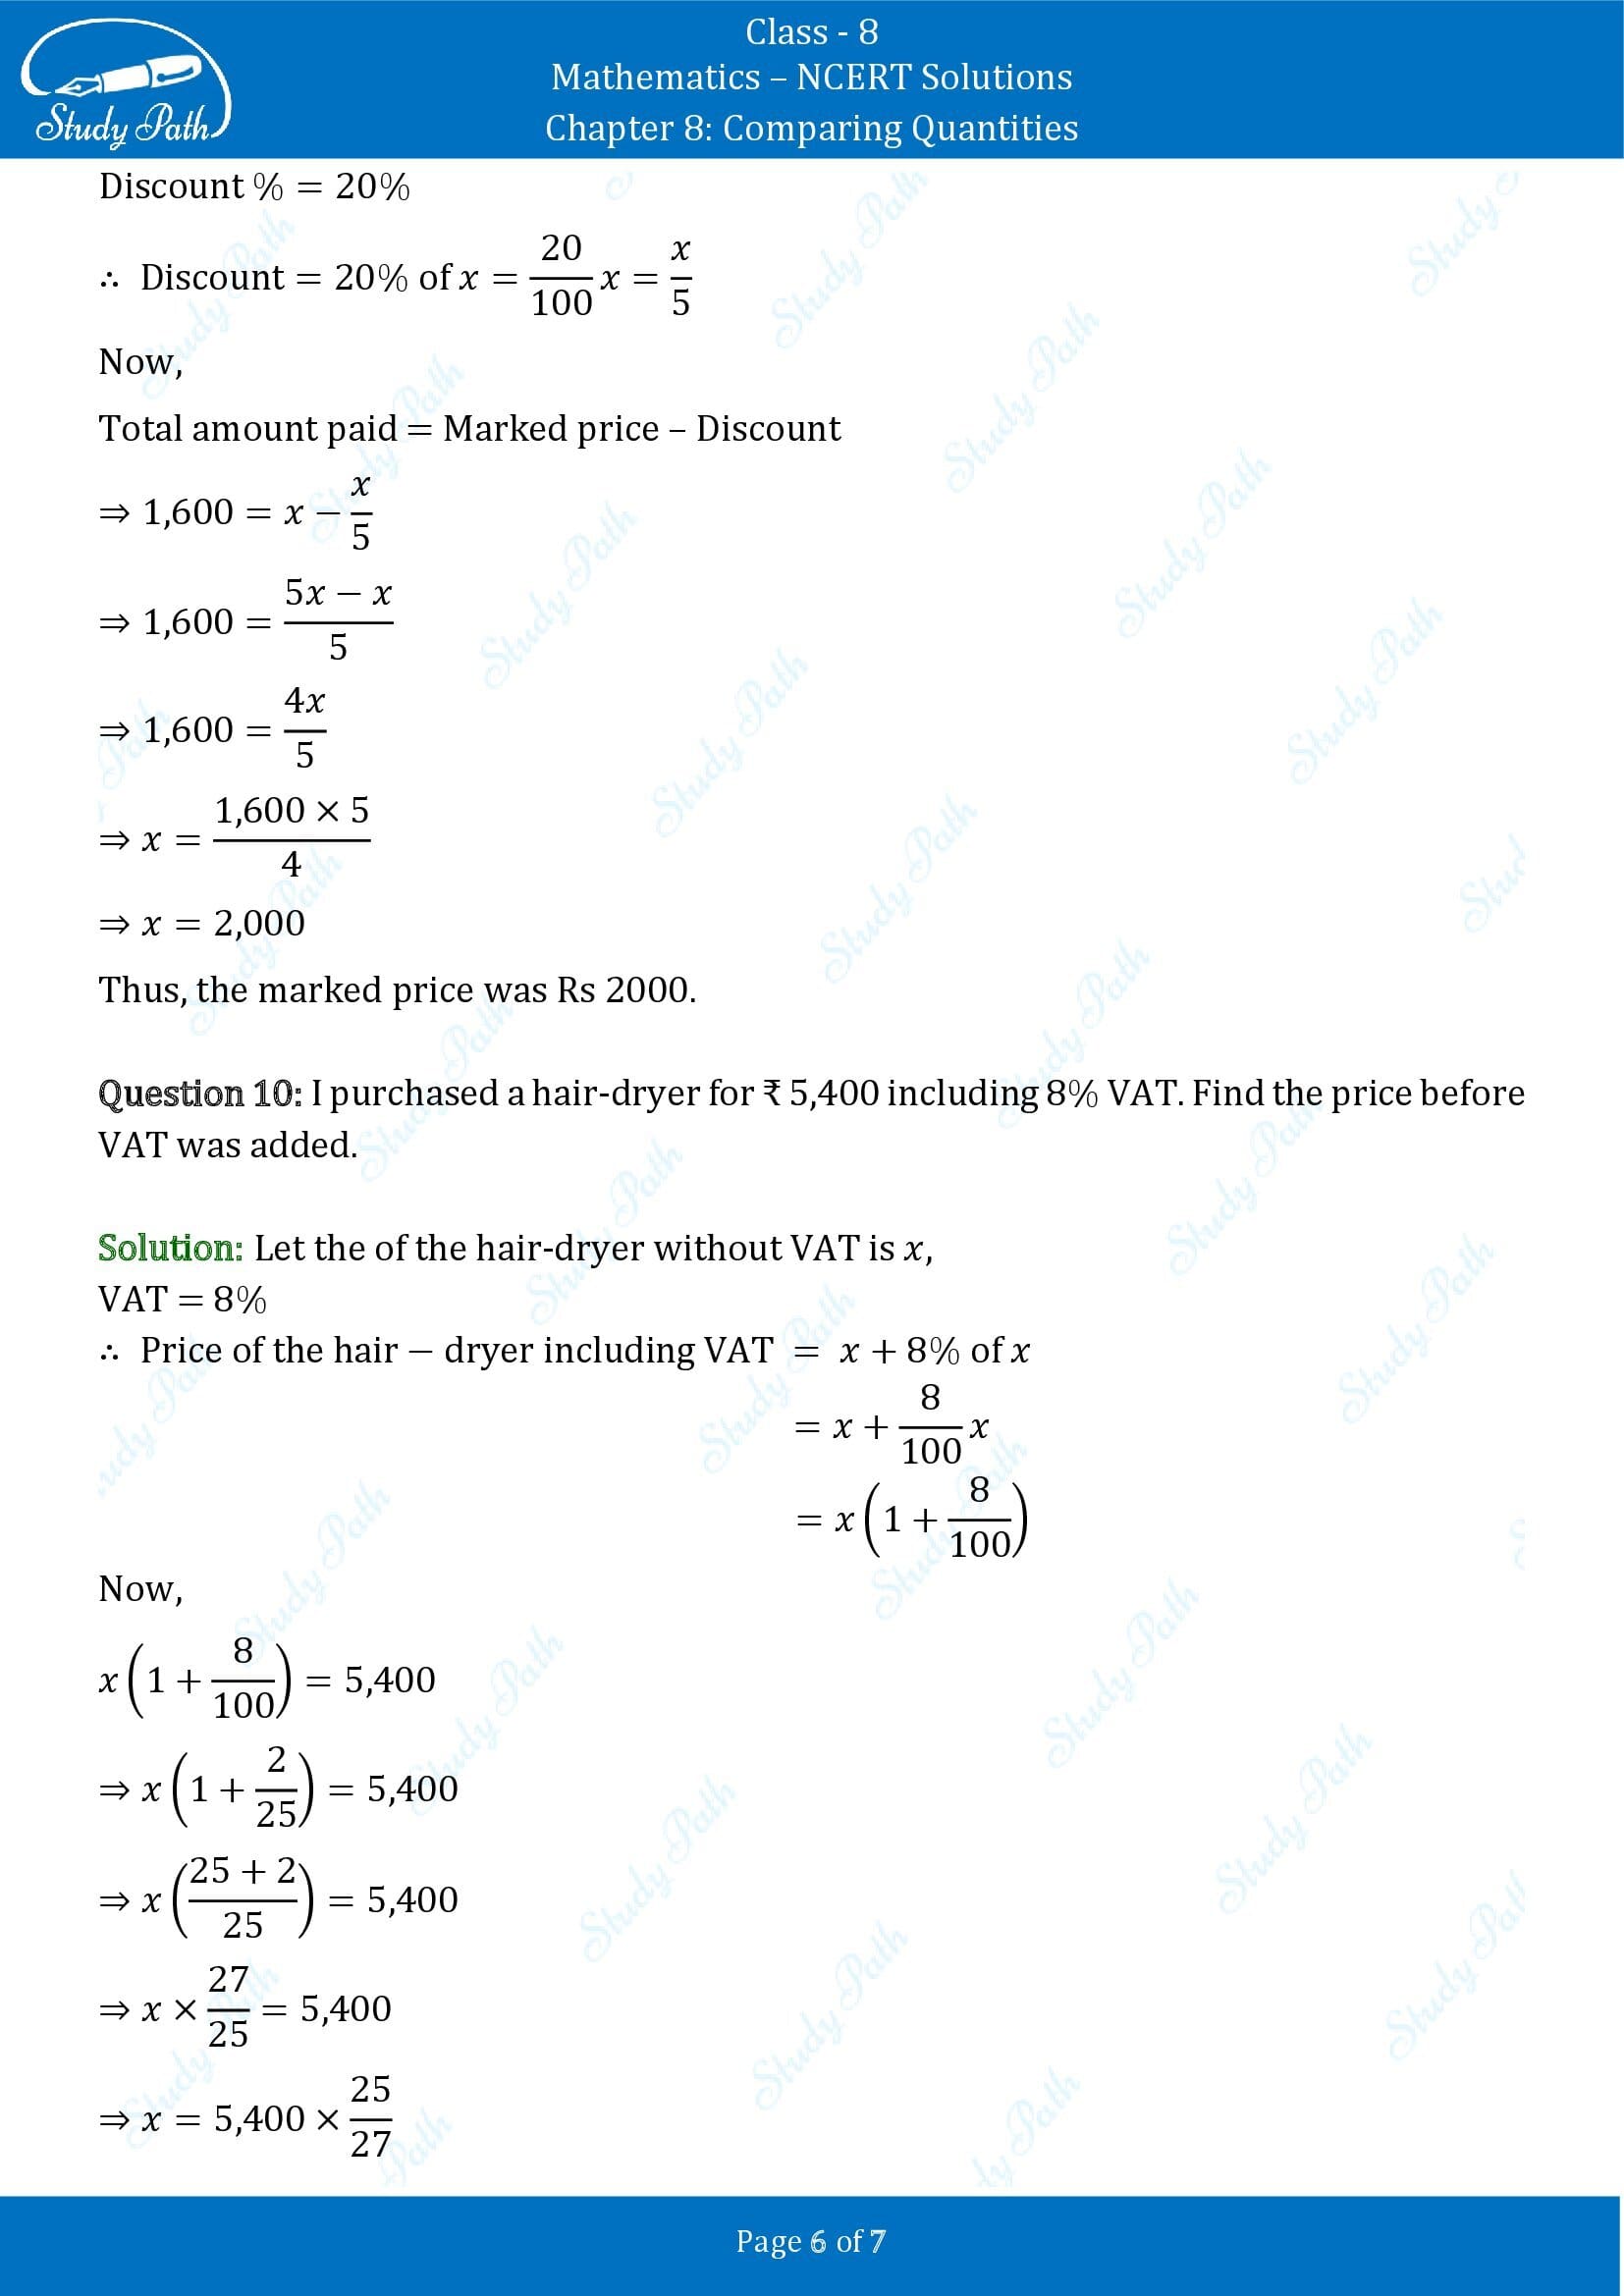 NCERT Solutions for Class 8 Maths Chapter 8 Comparing Quantities Exercise 8.2 00006